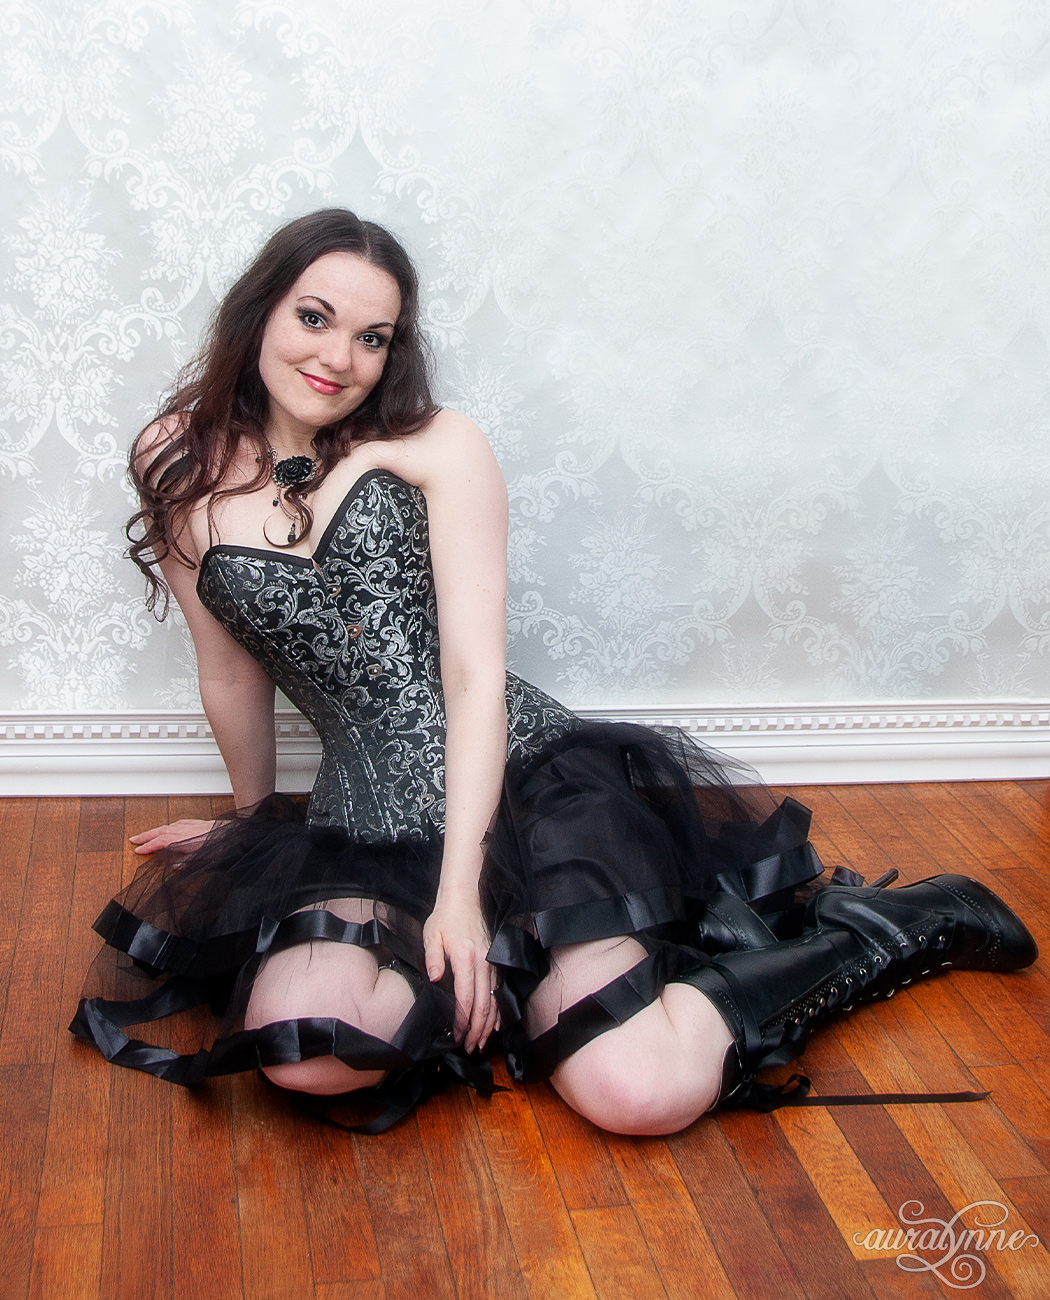 Sitting pretty (and comfortably) while tightlaced in a corset